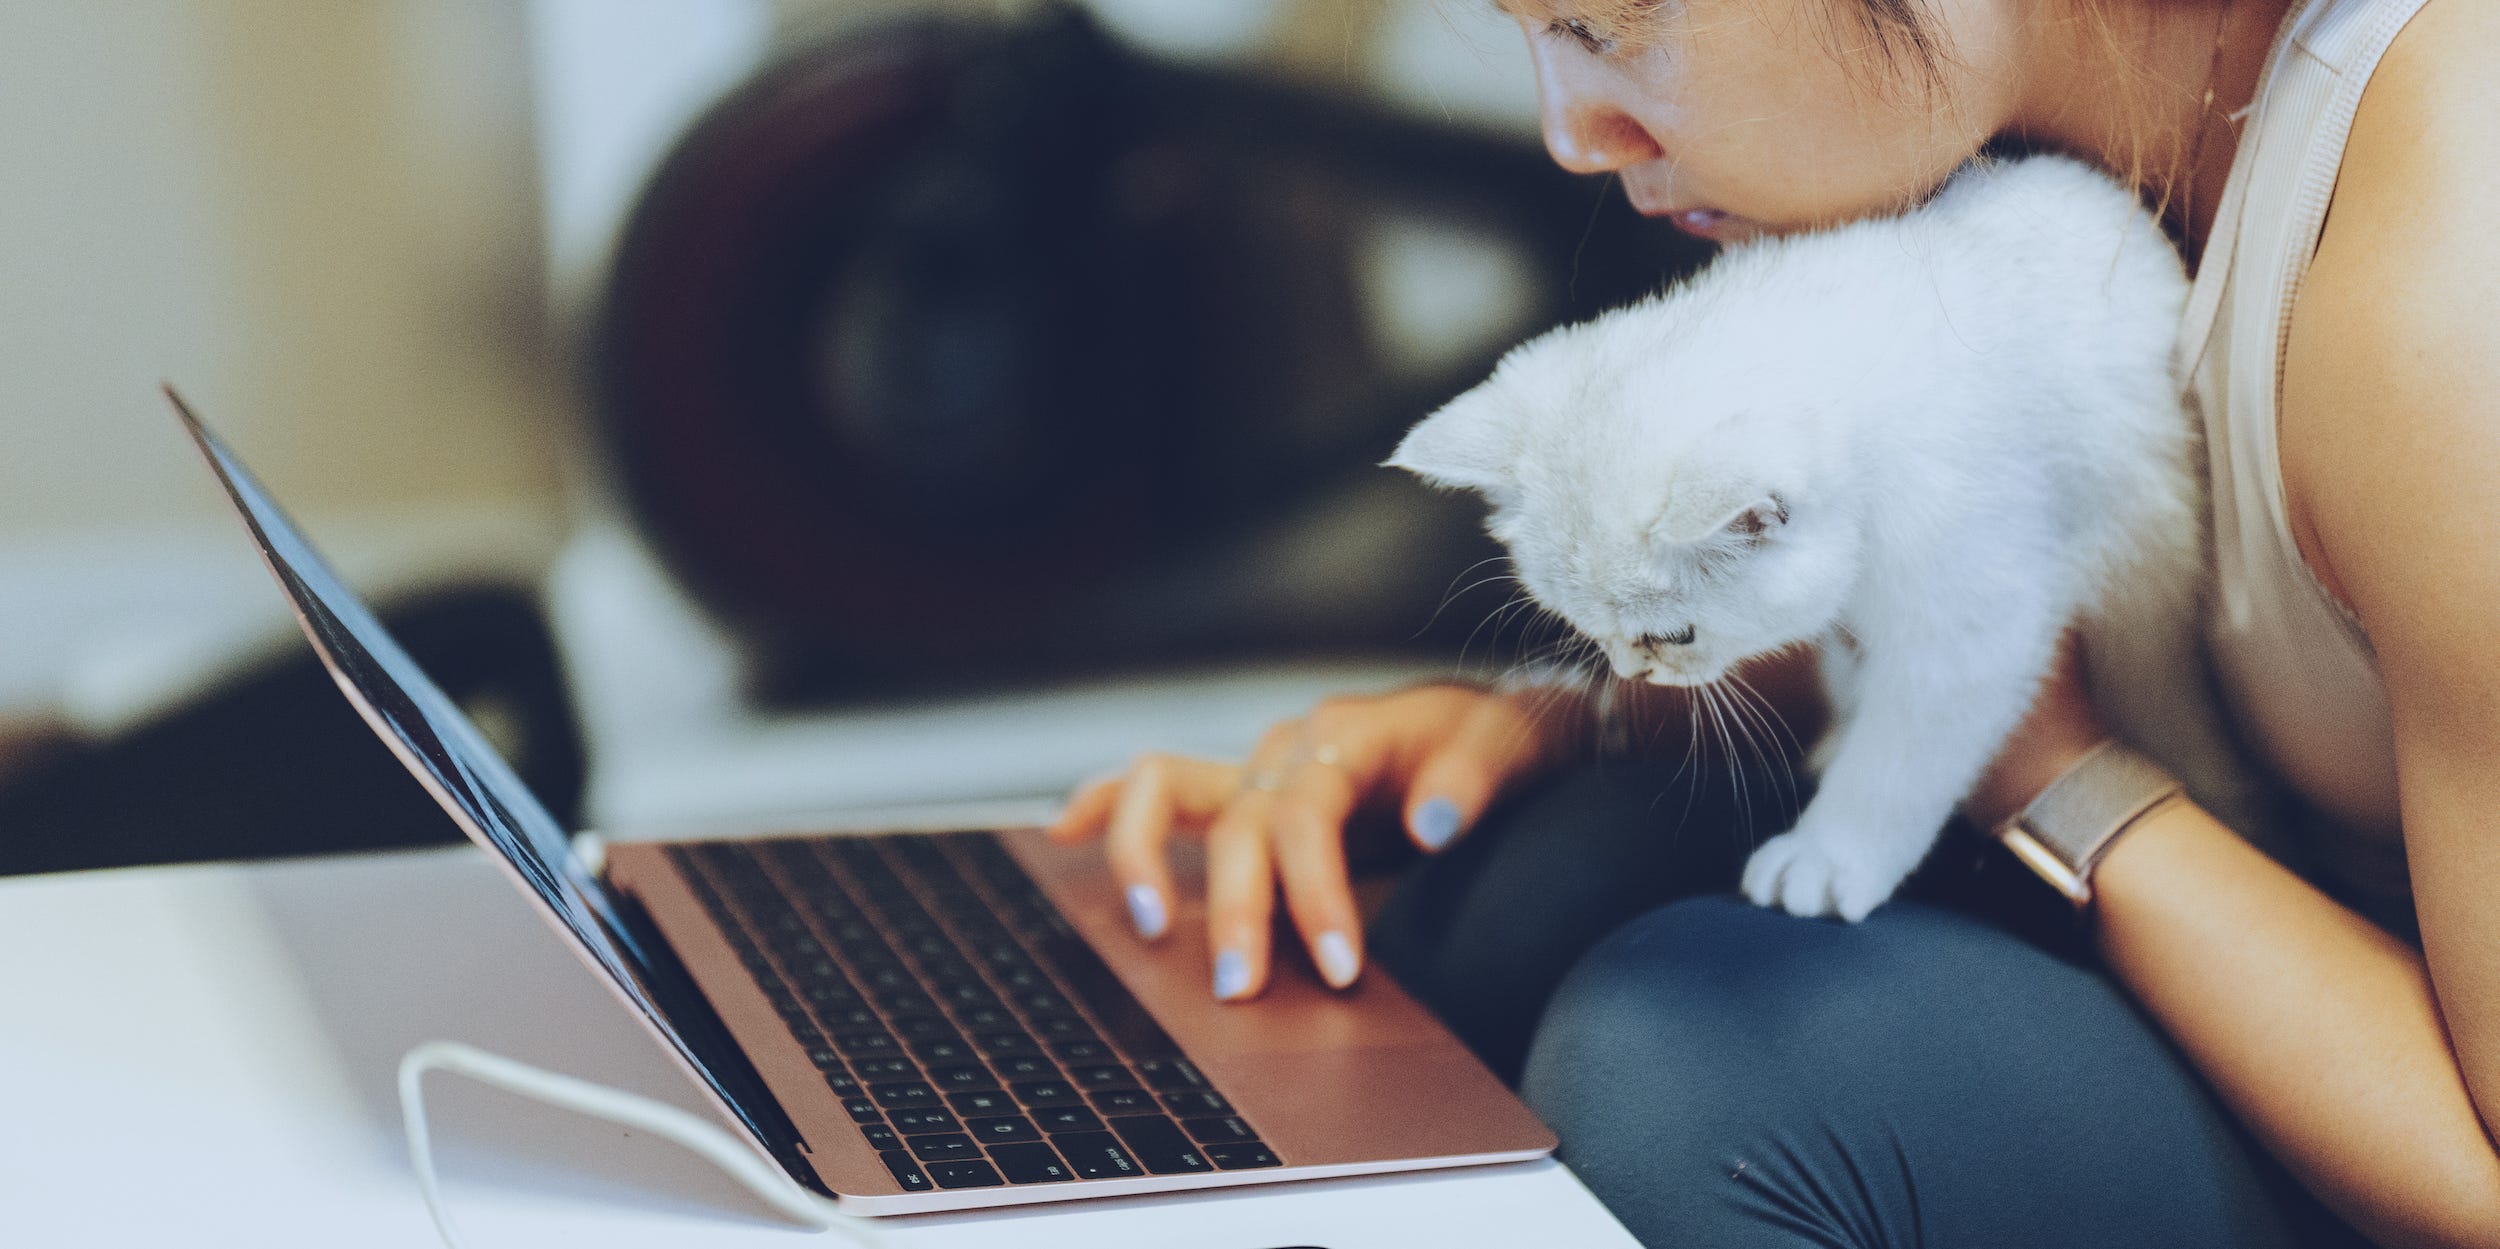 woman using laptop computer at home with cat